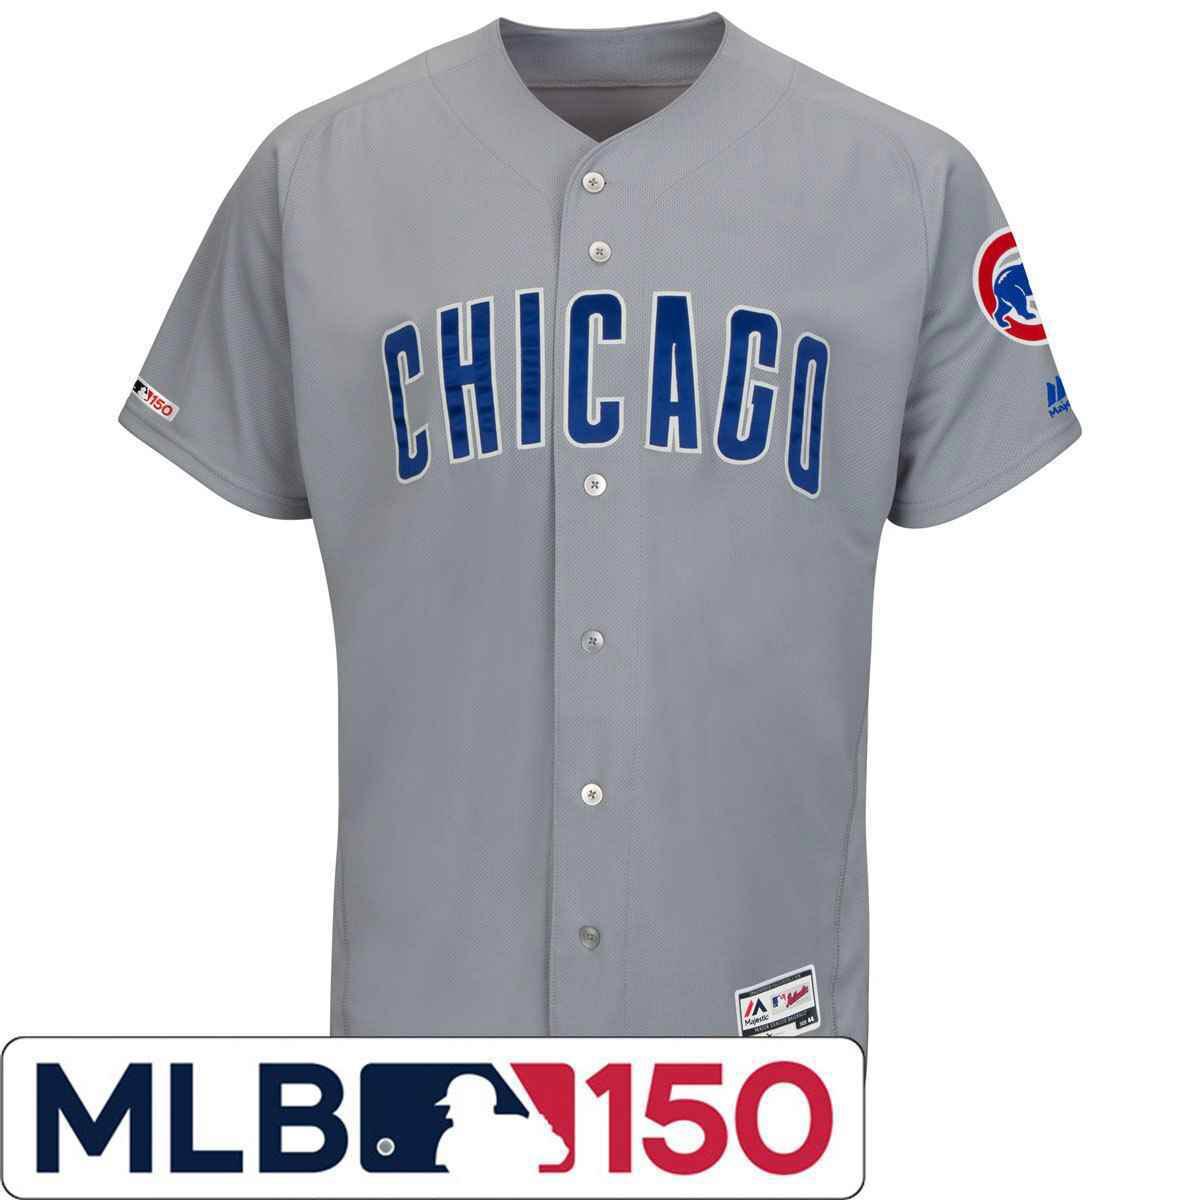 Men's Nike Gray Chicago Cubs Road Authentic Team Jersey